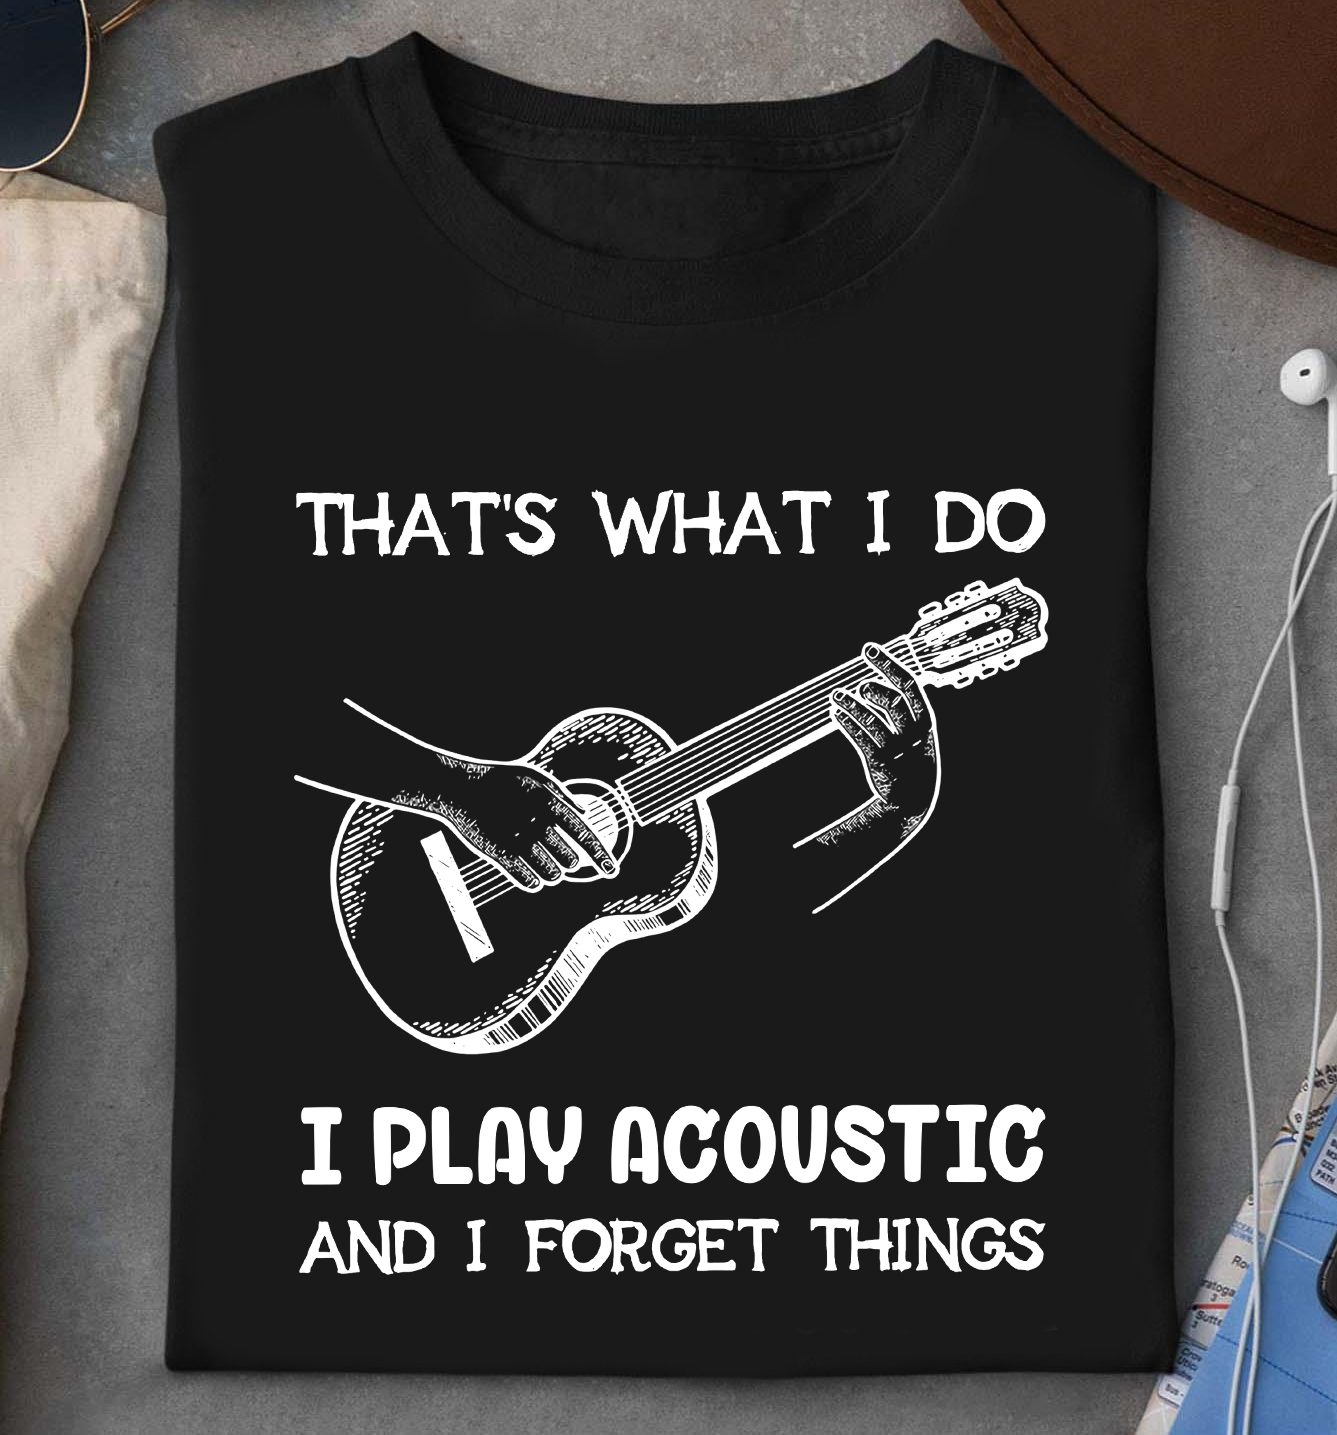 That's what I do I play acoustic and I forget things - Guitar lover